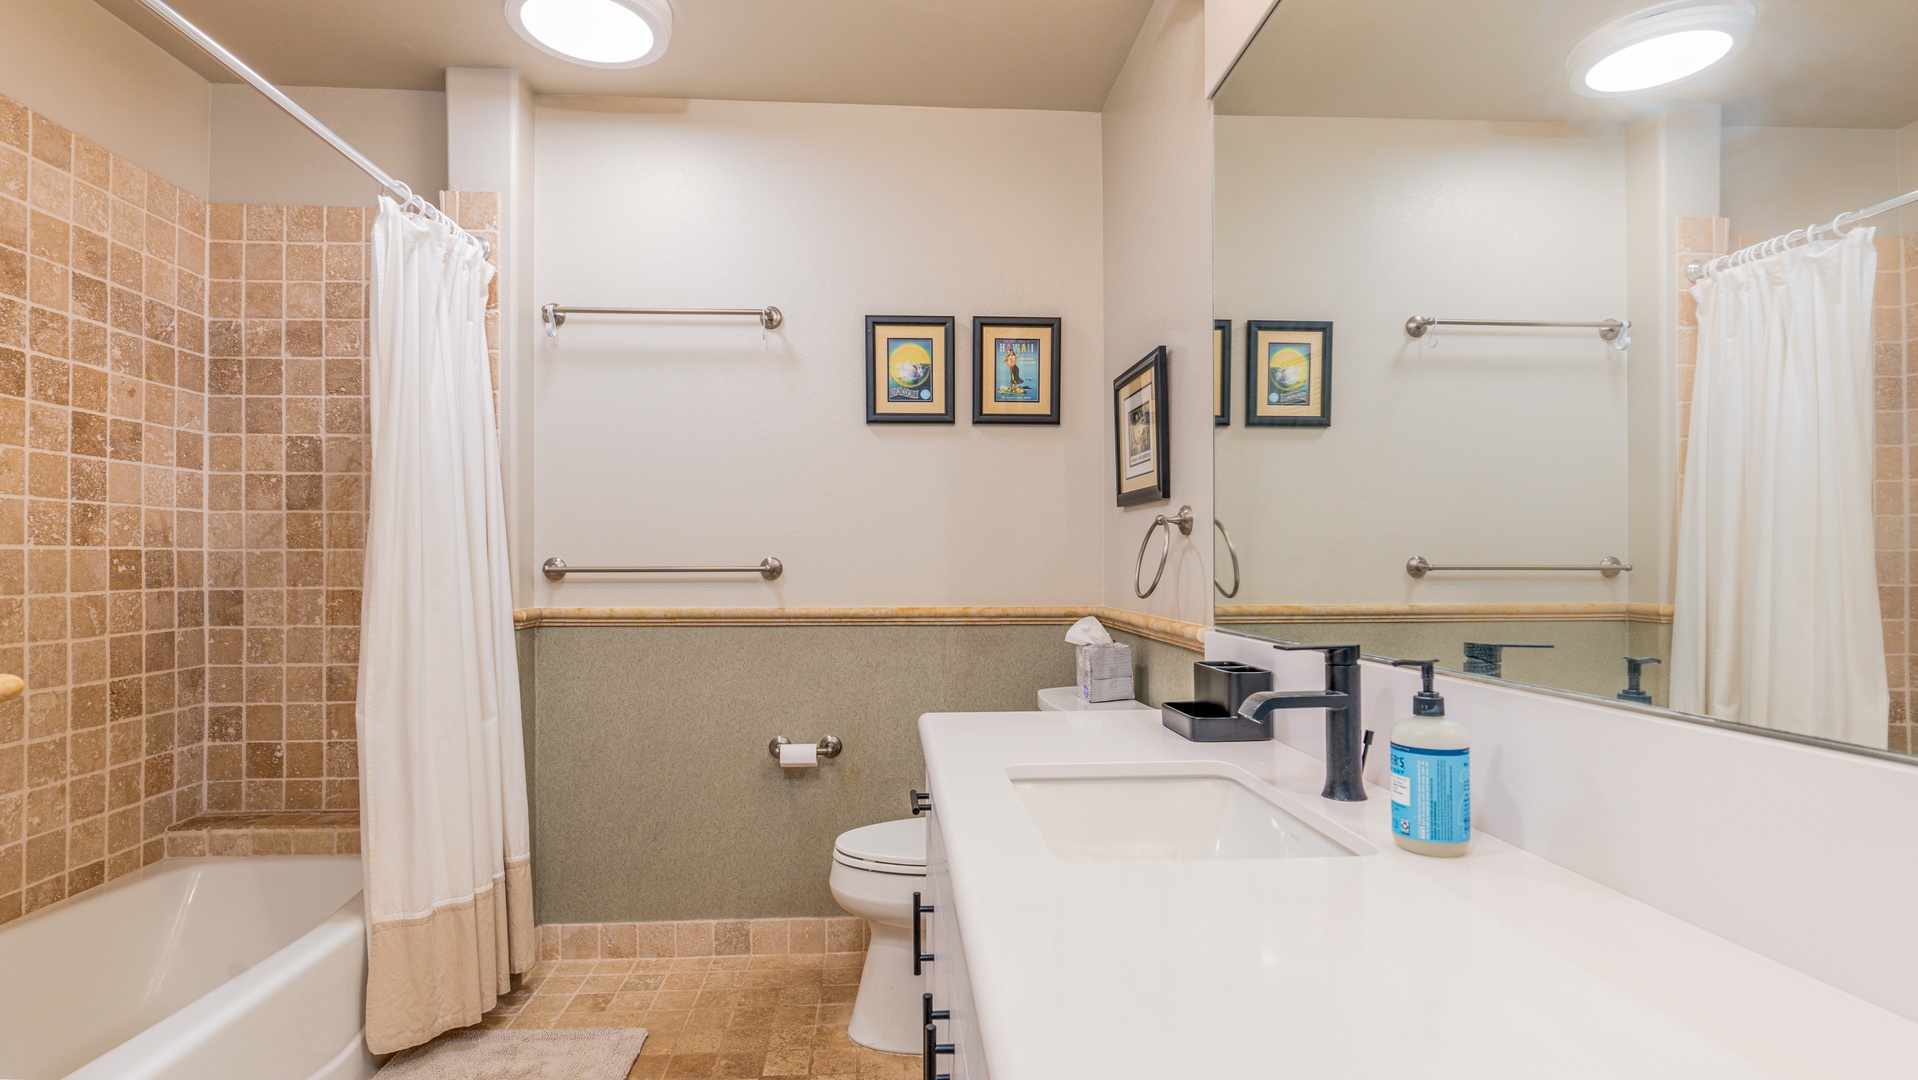 Kapolei Vacation Rentals, Kai Lani 24B - The second guest bathroom with a shower and vanity.